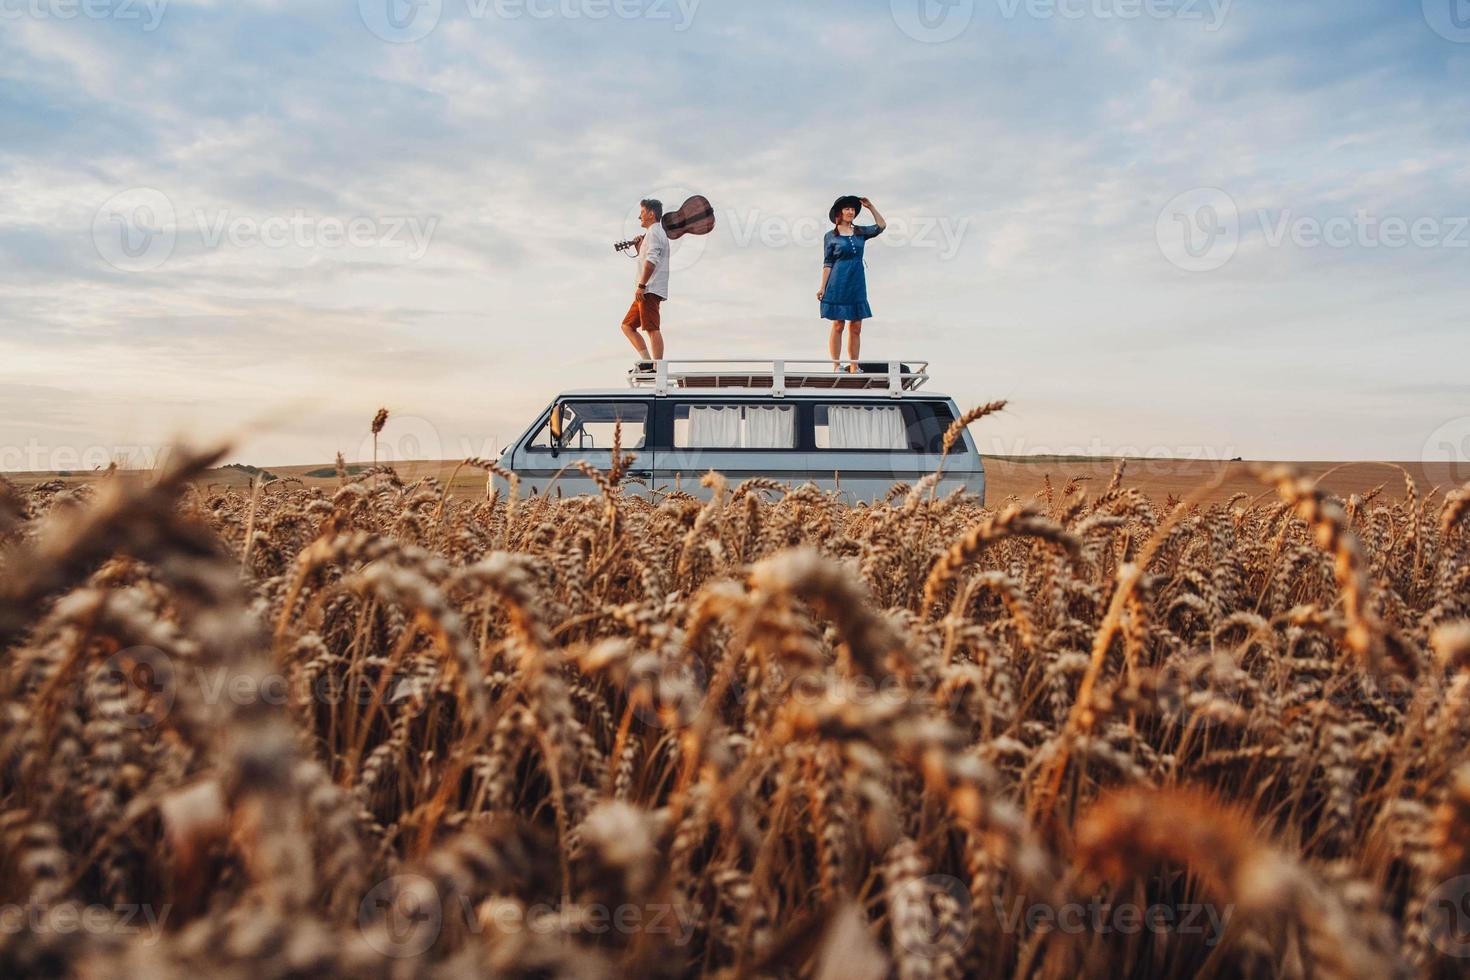 Man with a guitar and woman standing on roof of a car in a wheat field photo